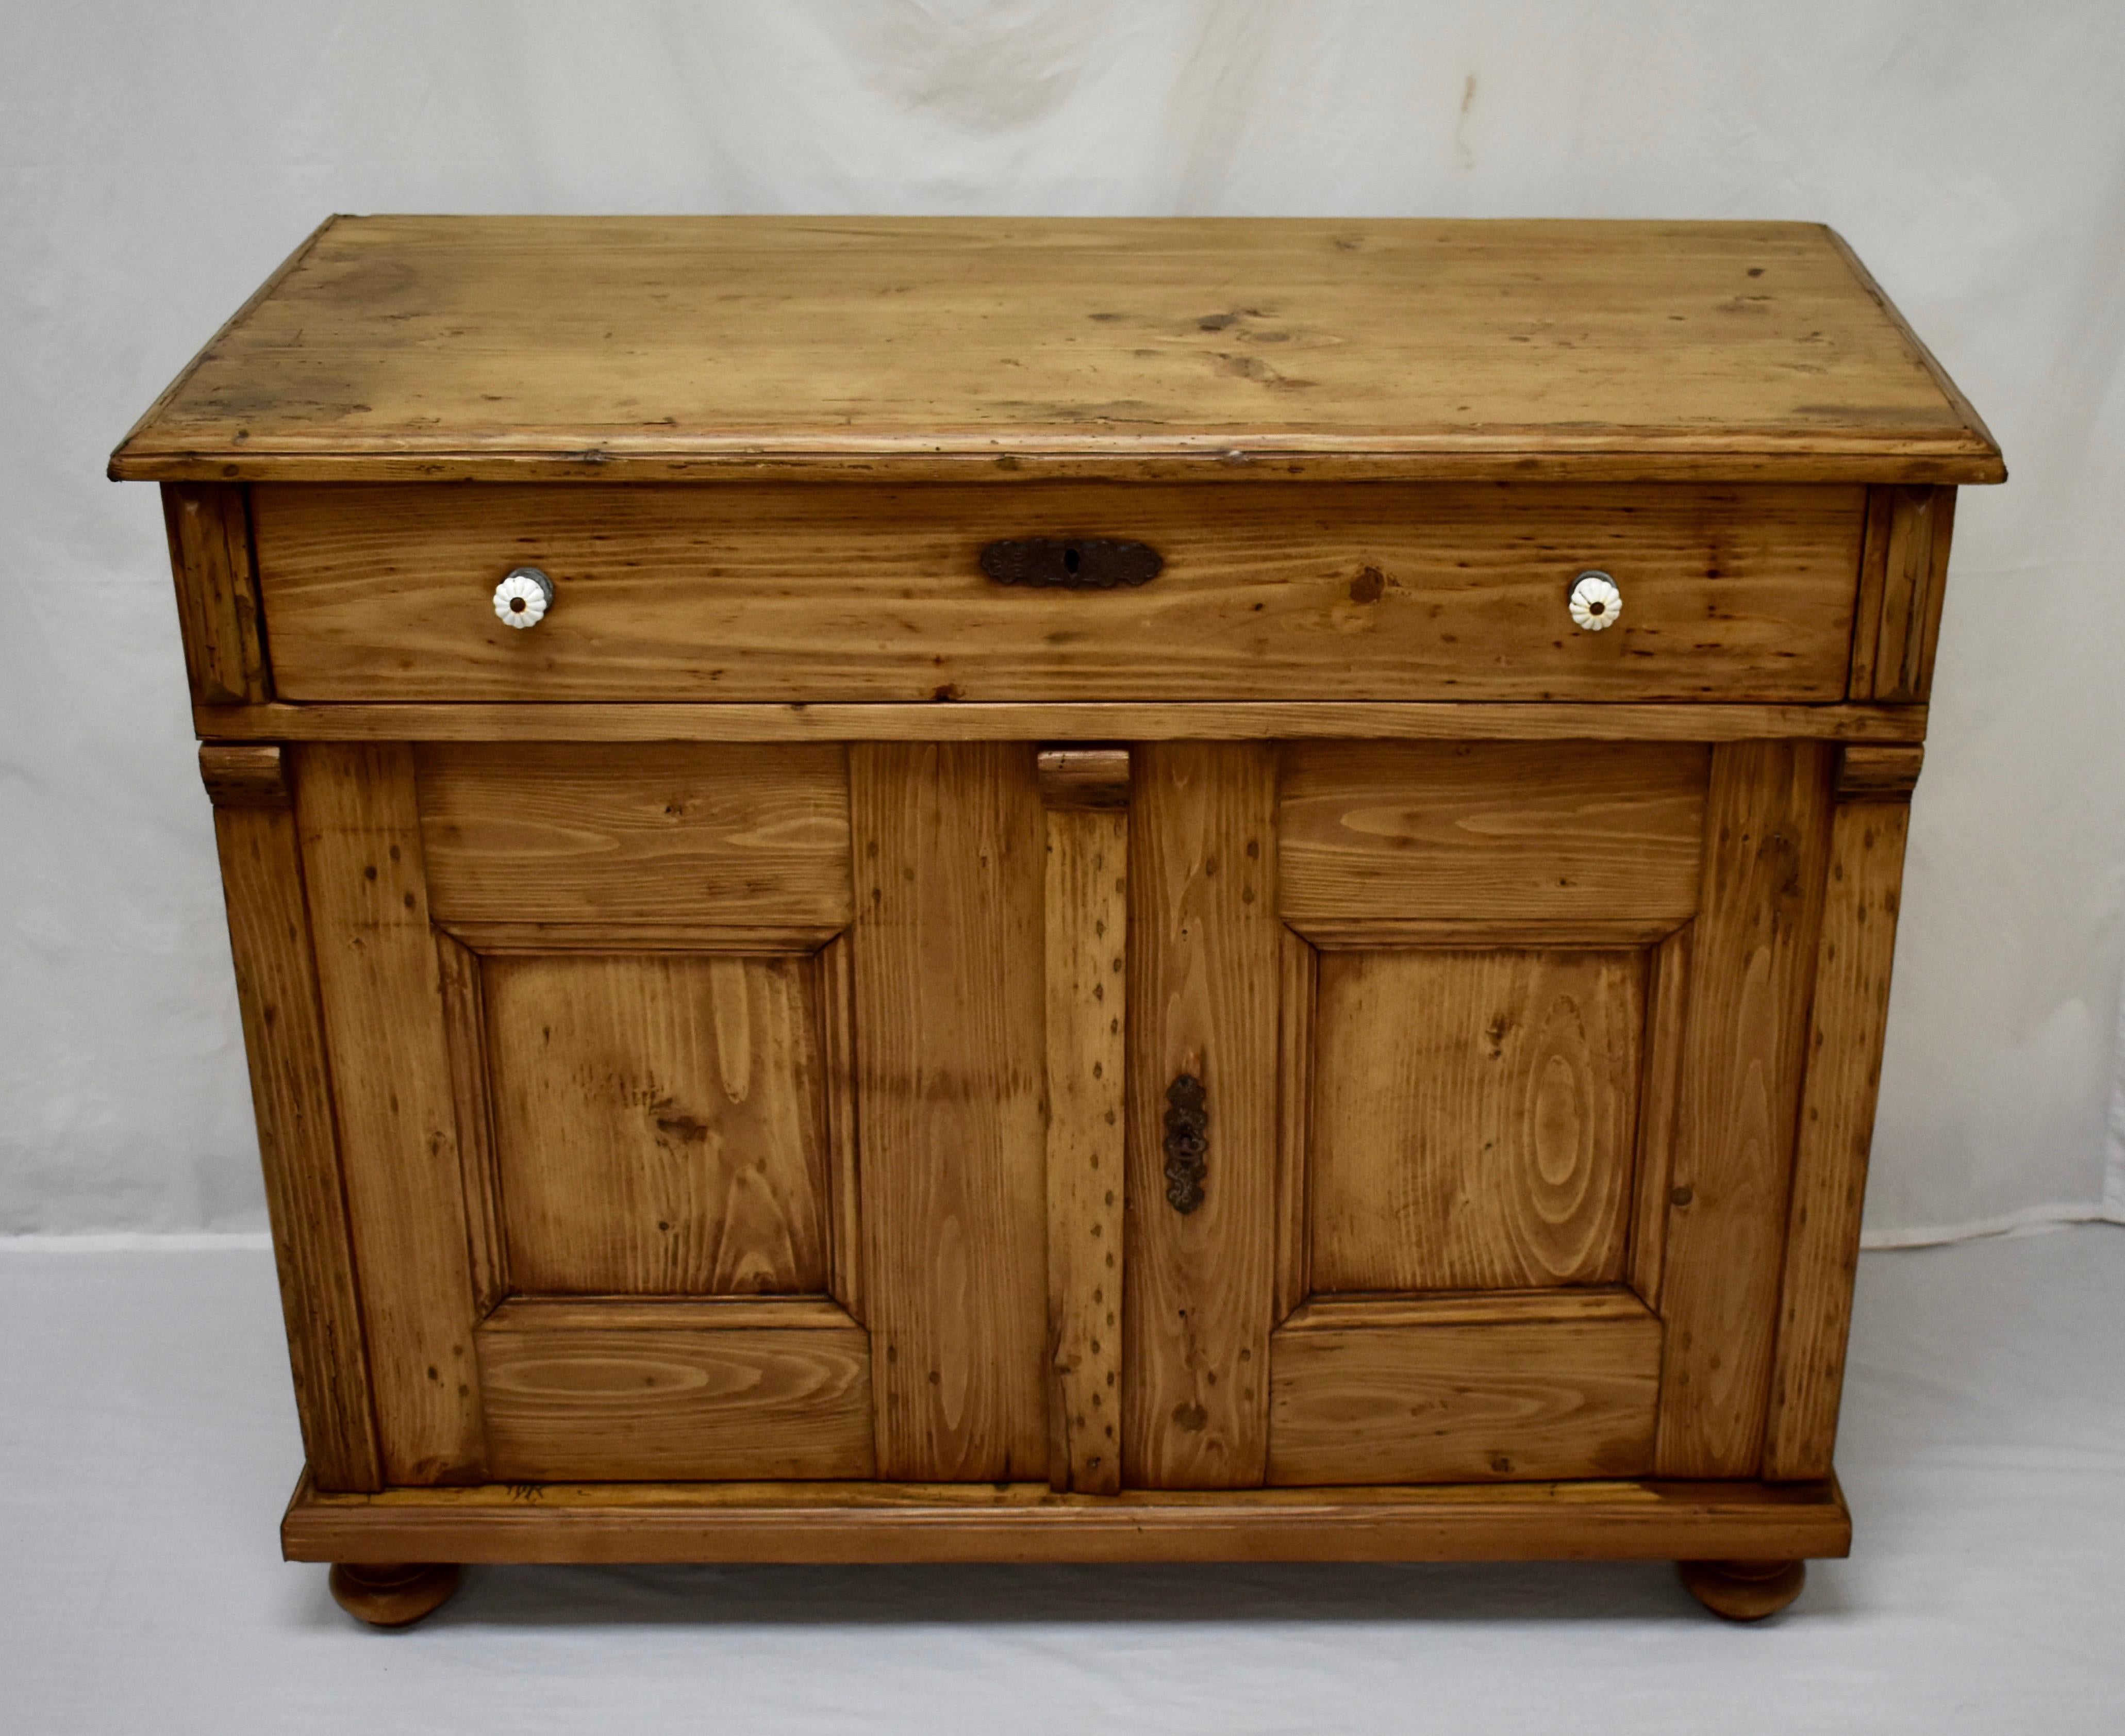 This is a fairly plain pine two-door dresser base with lots of character. The two board top, scratched and stained with small patches of filler and a few small candle burns, is banded with an applied molding and sits above a single long handcut